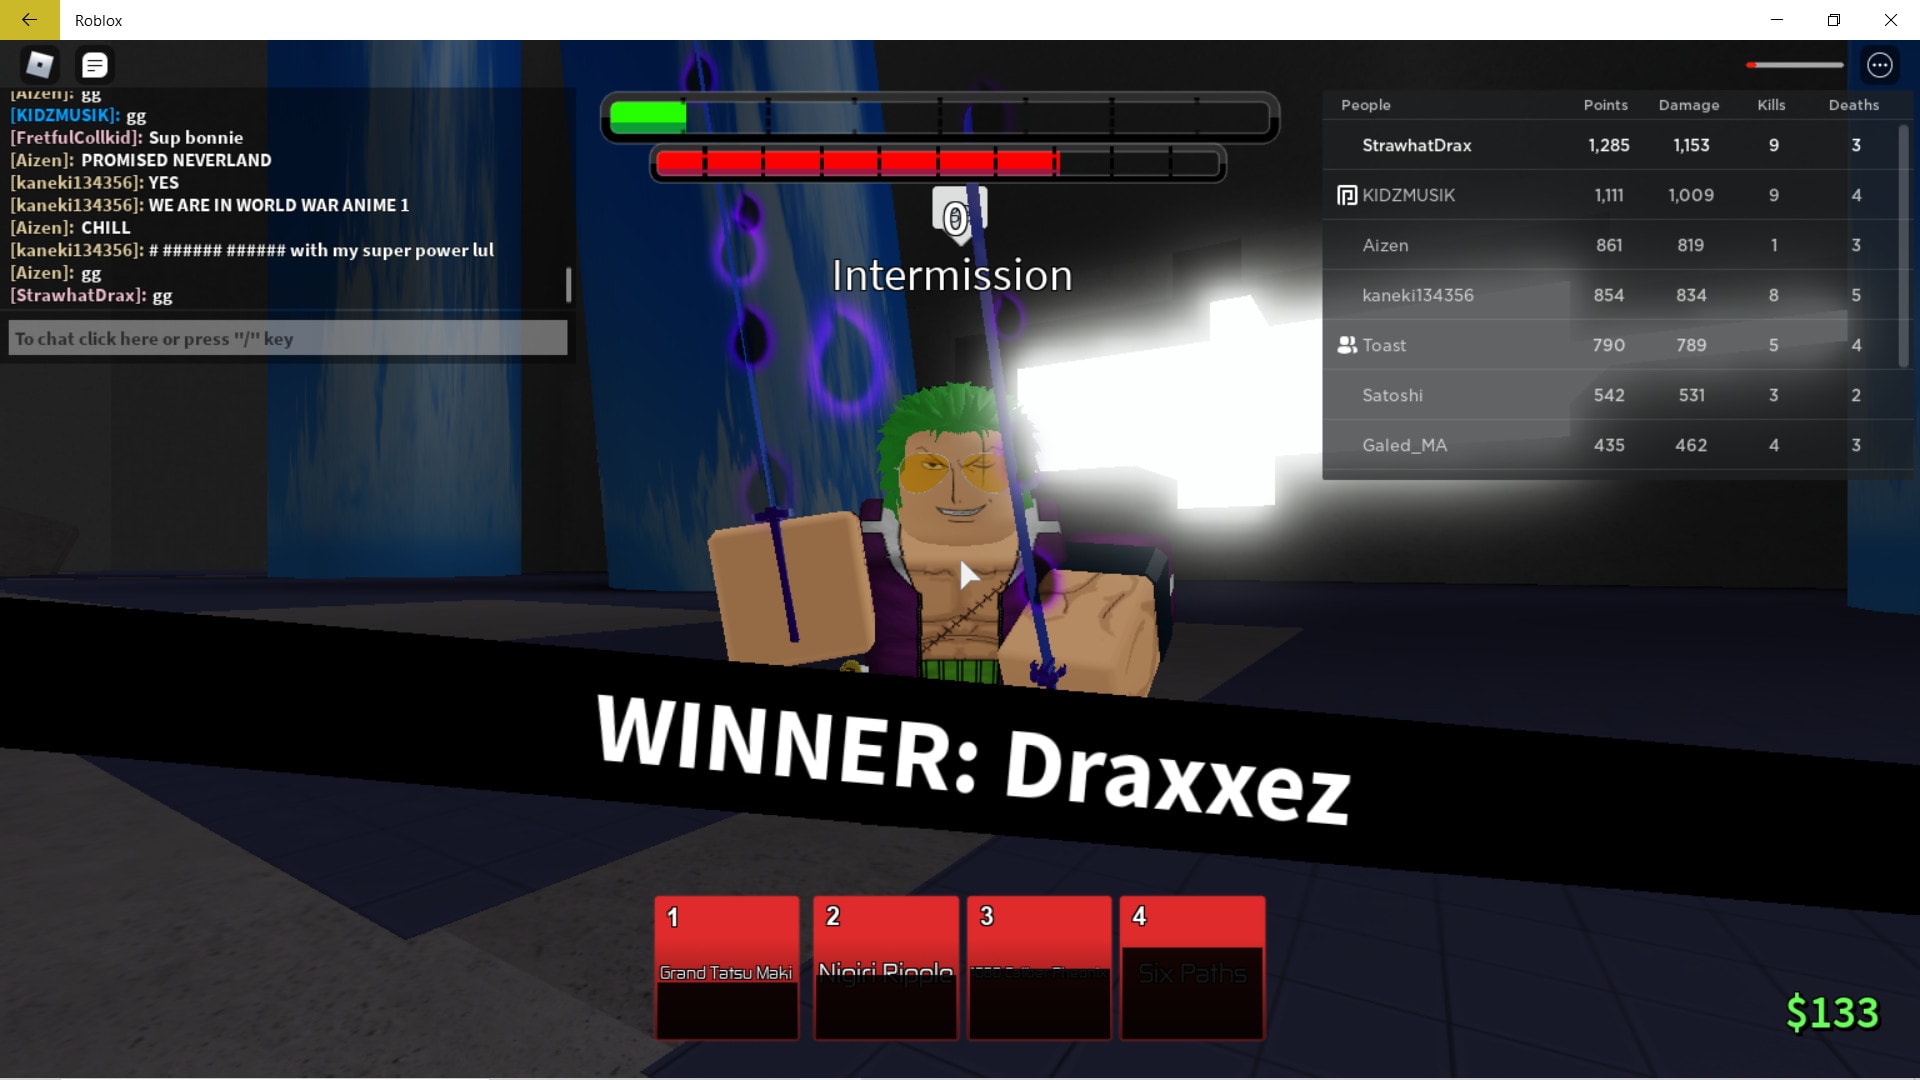 Coach you in aba anime battle arena on roblox by Draxxez | Fiverr